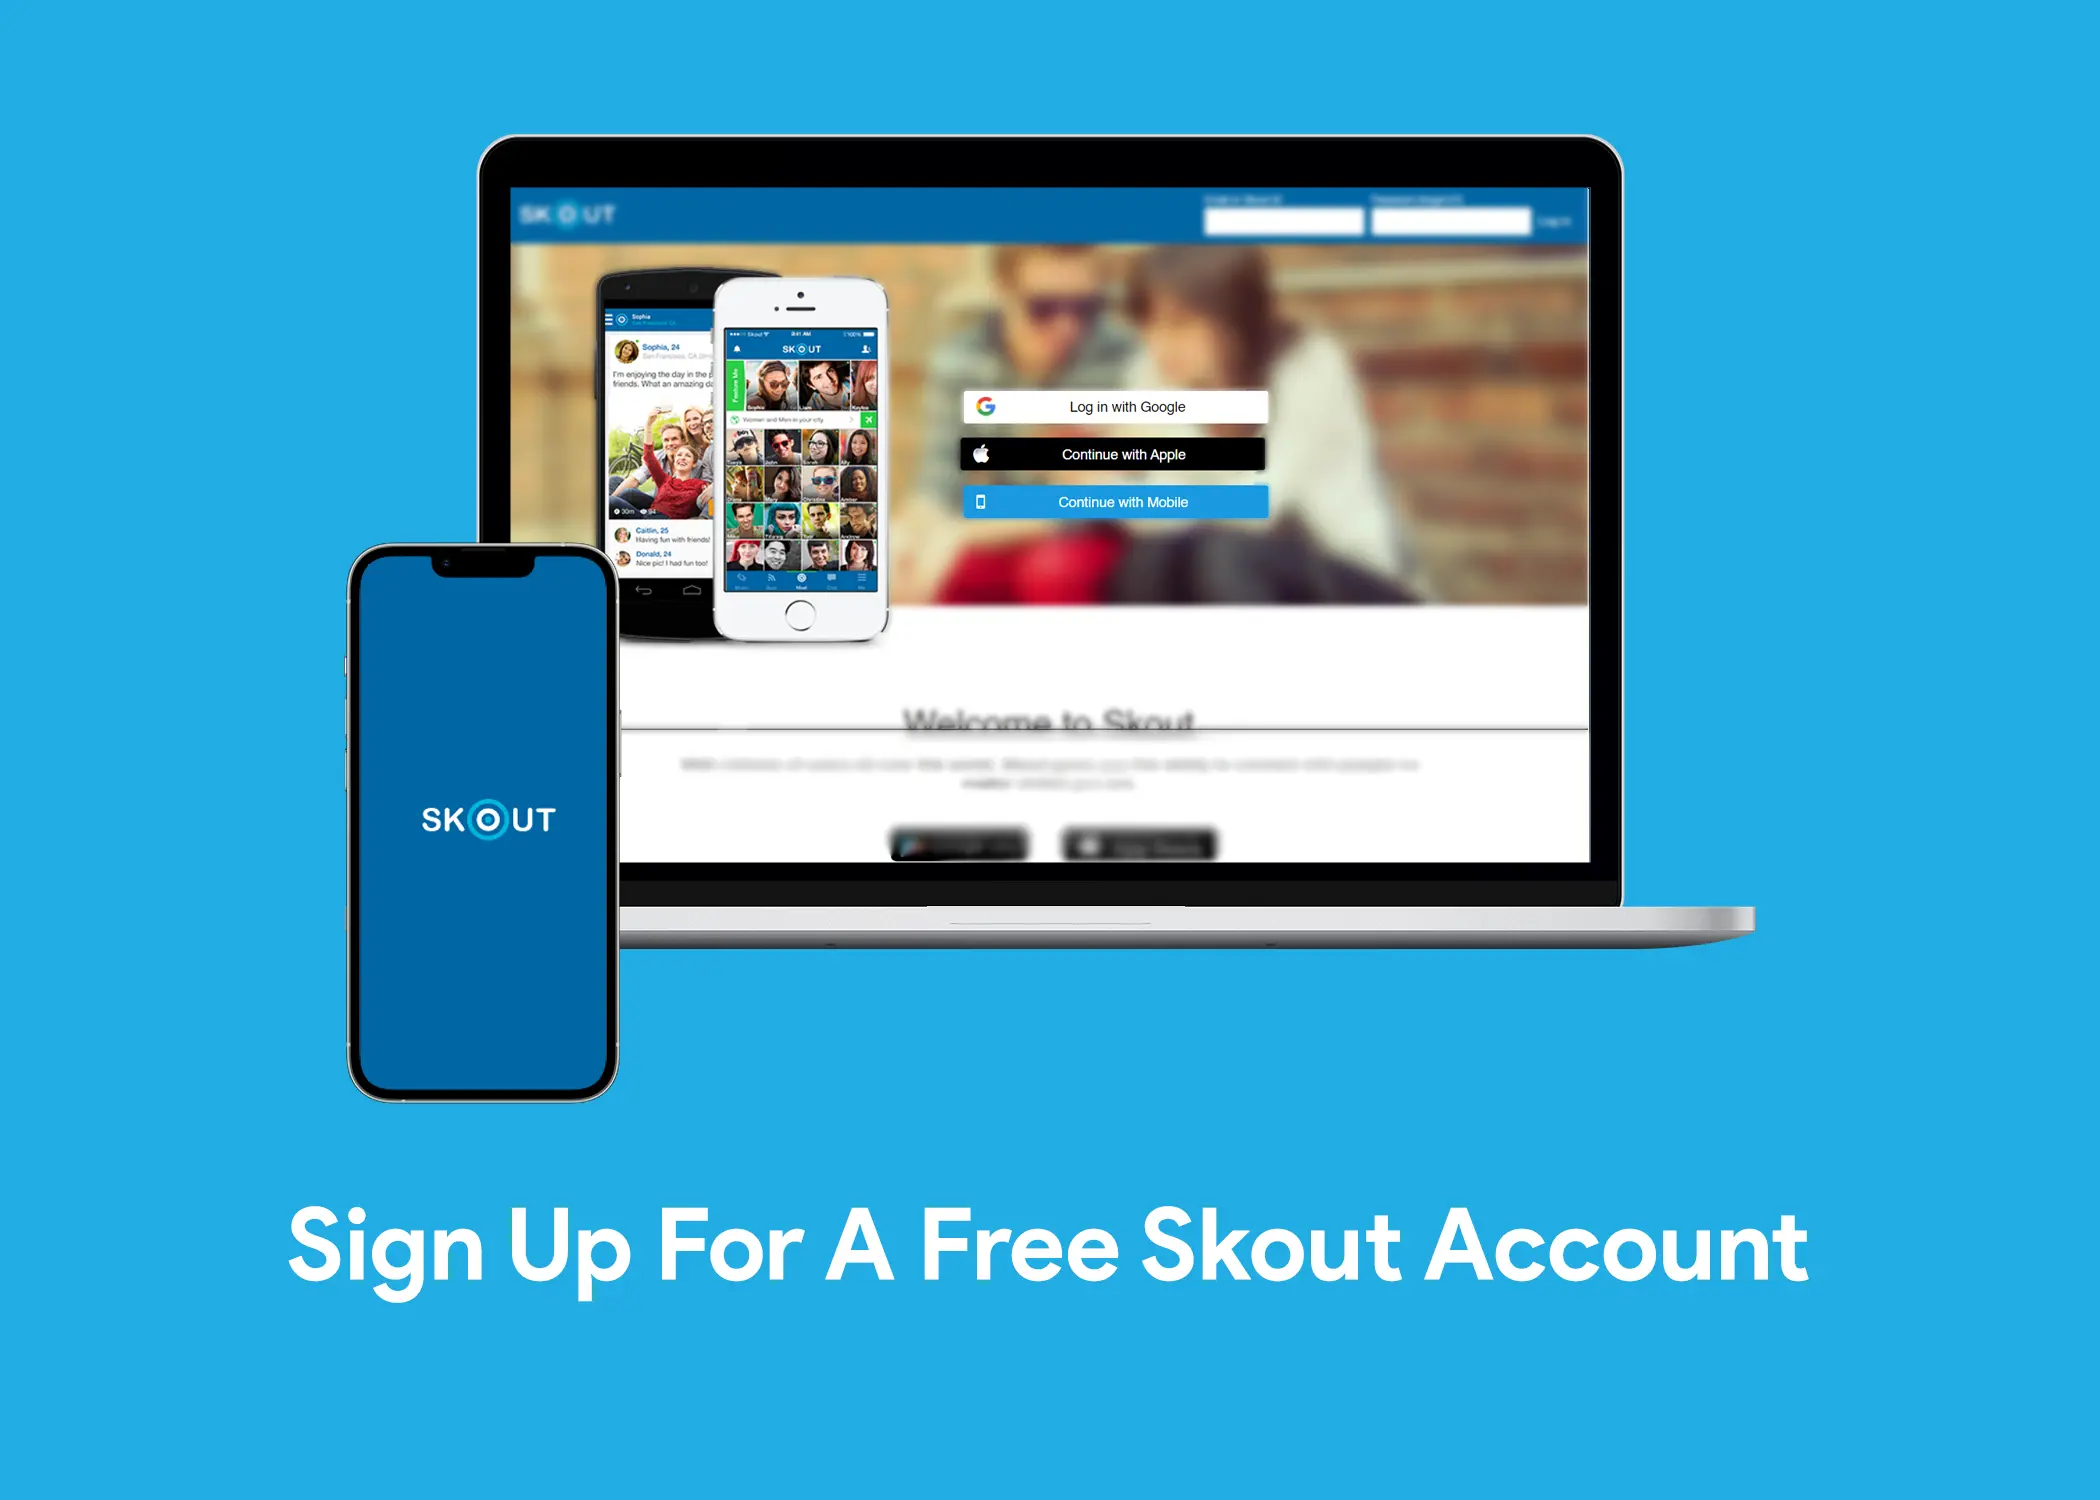 Sign Up For A Free Skout Account